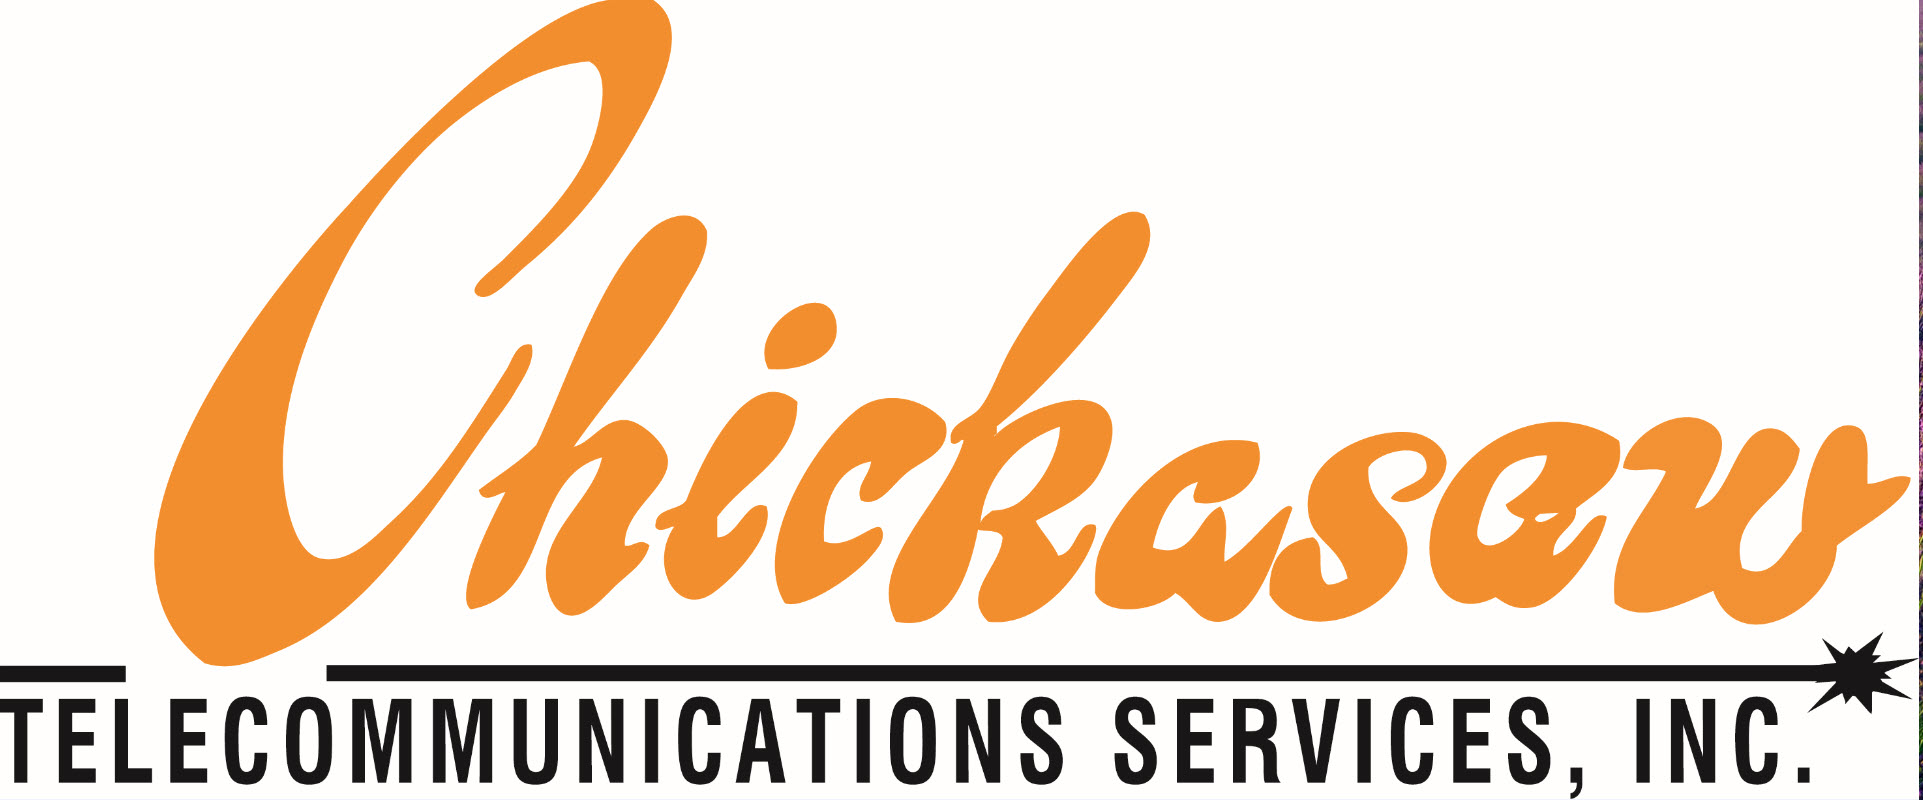 Chickasaw telecommunications services